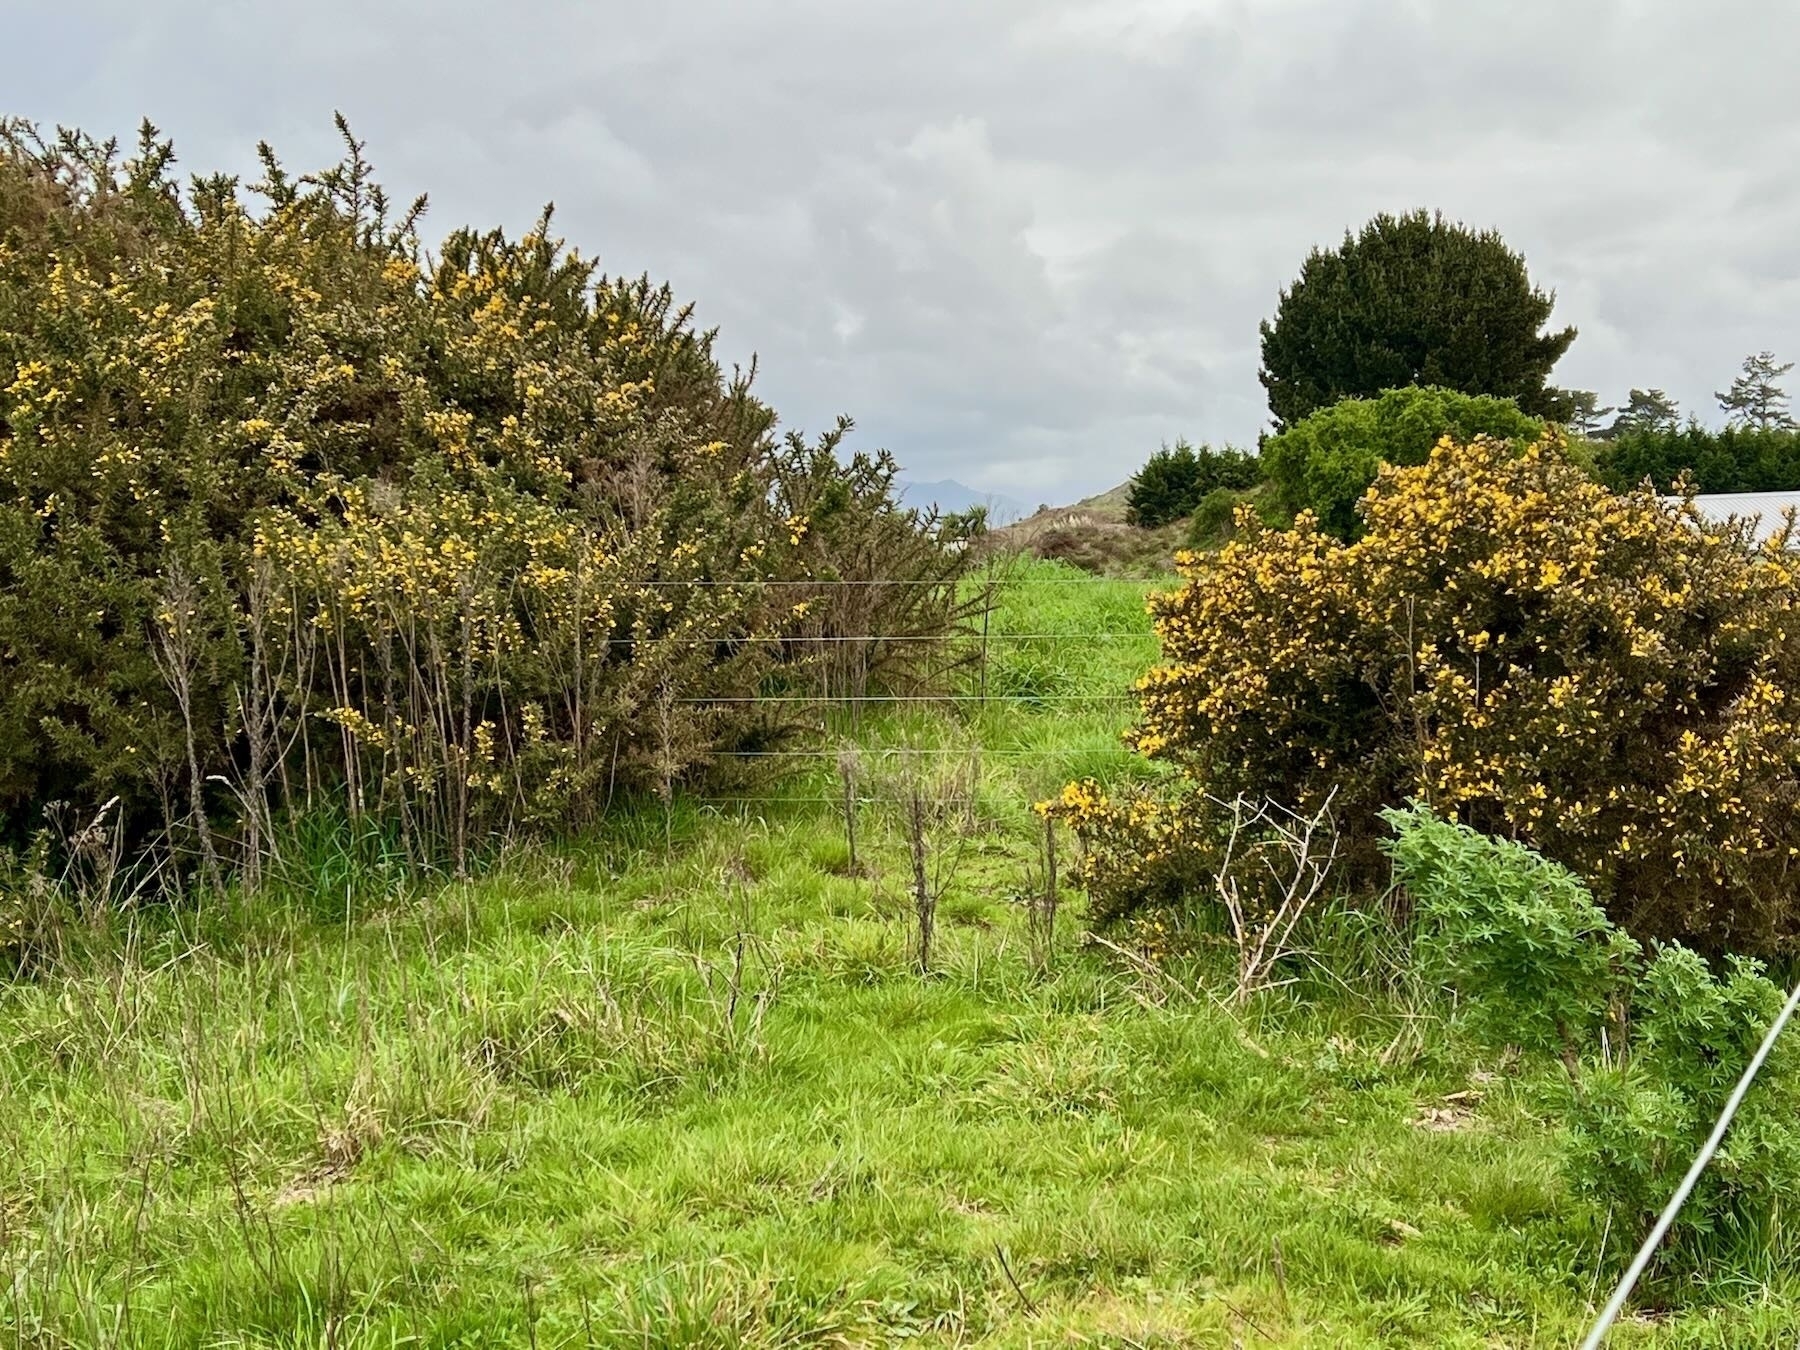 Gorse bushes in bloom. 